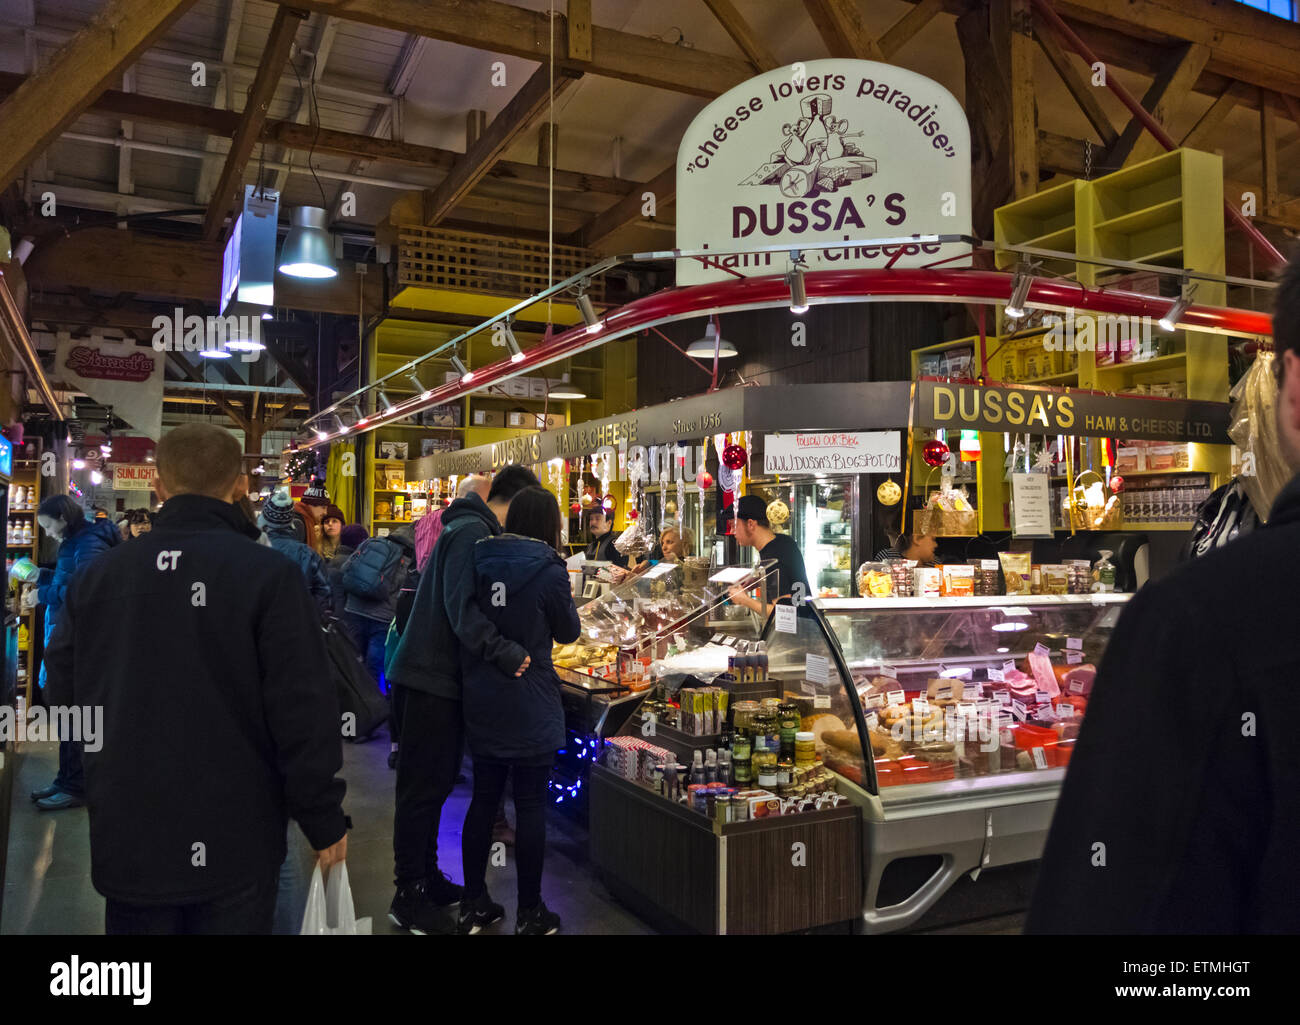 Dussa's cheeses and deli at Granville Island Public Market.  Vancouver, British Columbia Canada.  People shopping, fresh food. Stock Photo